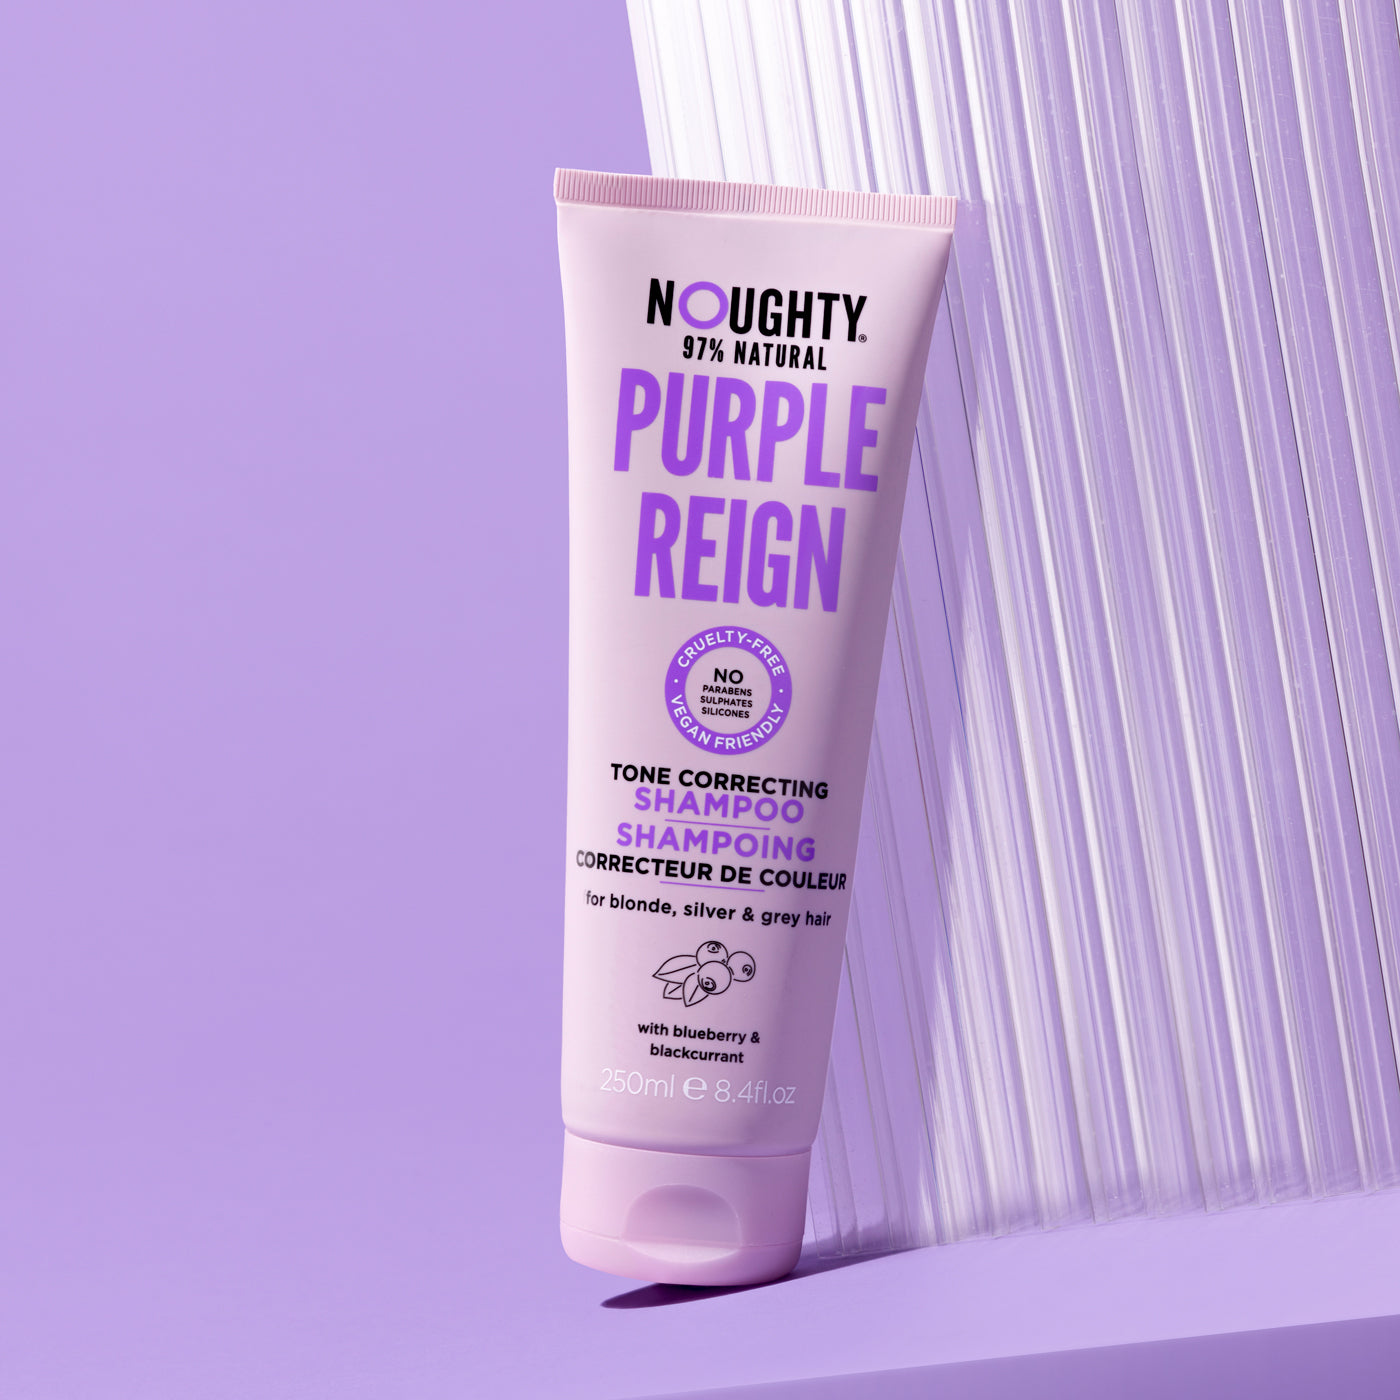 Noughty Purple Reign tone correcting shampoo for blonde, bleached, highlighted, silver or grey hair. Natural haircare vegan cruelty free natural sulphate free paraben free